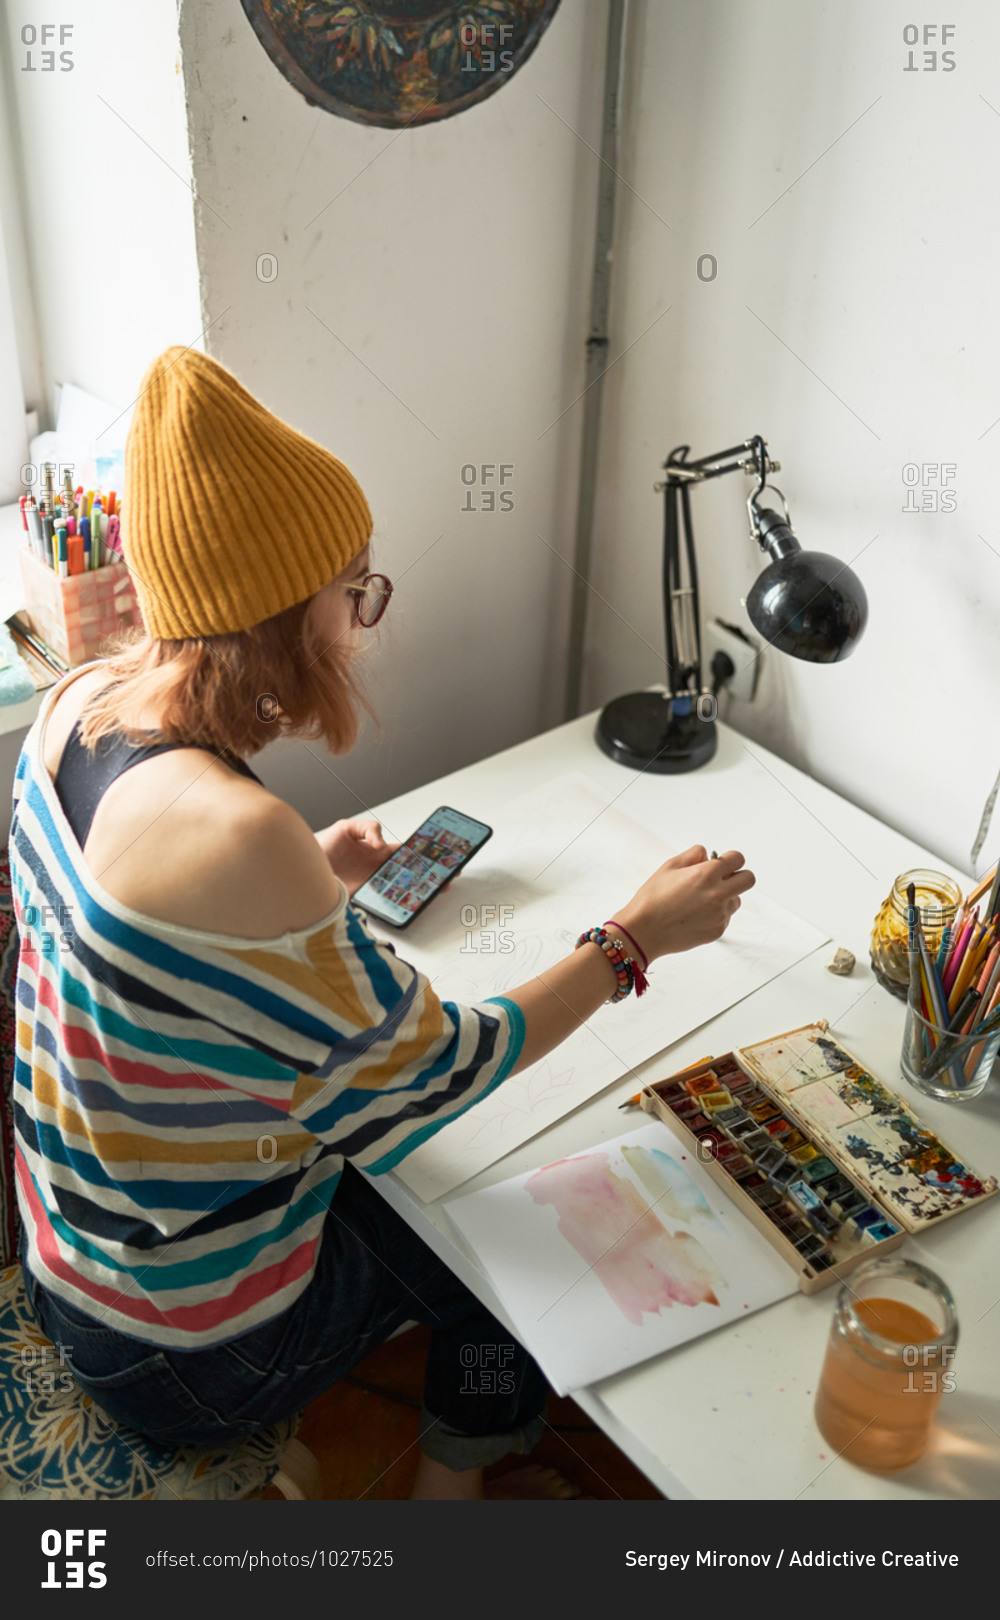 Female artist painting with watercolors and watching online video tutorial on smartphone while creating artwork in studio